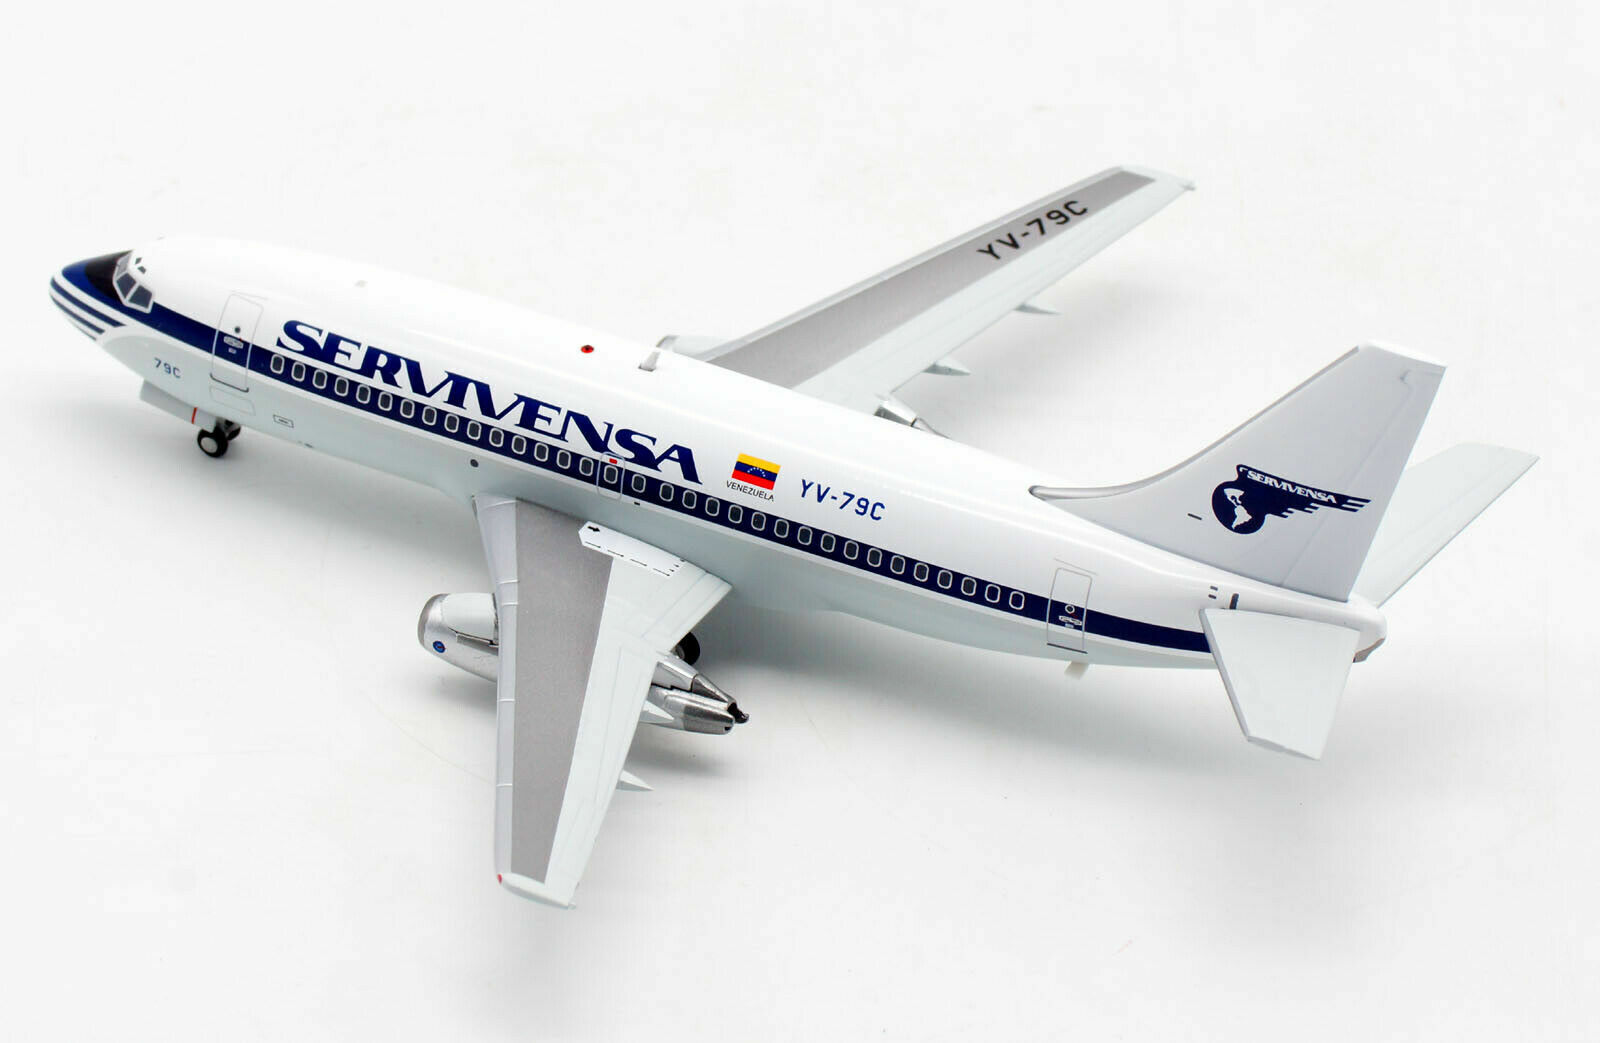 1:200 INF200 Servivensa 737-200 YV-79C with stand